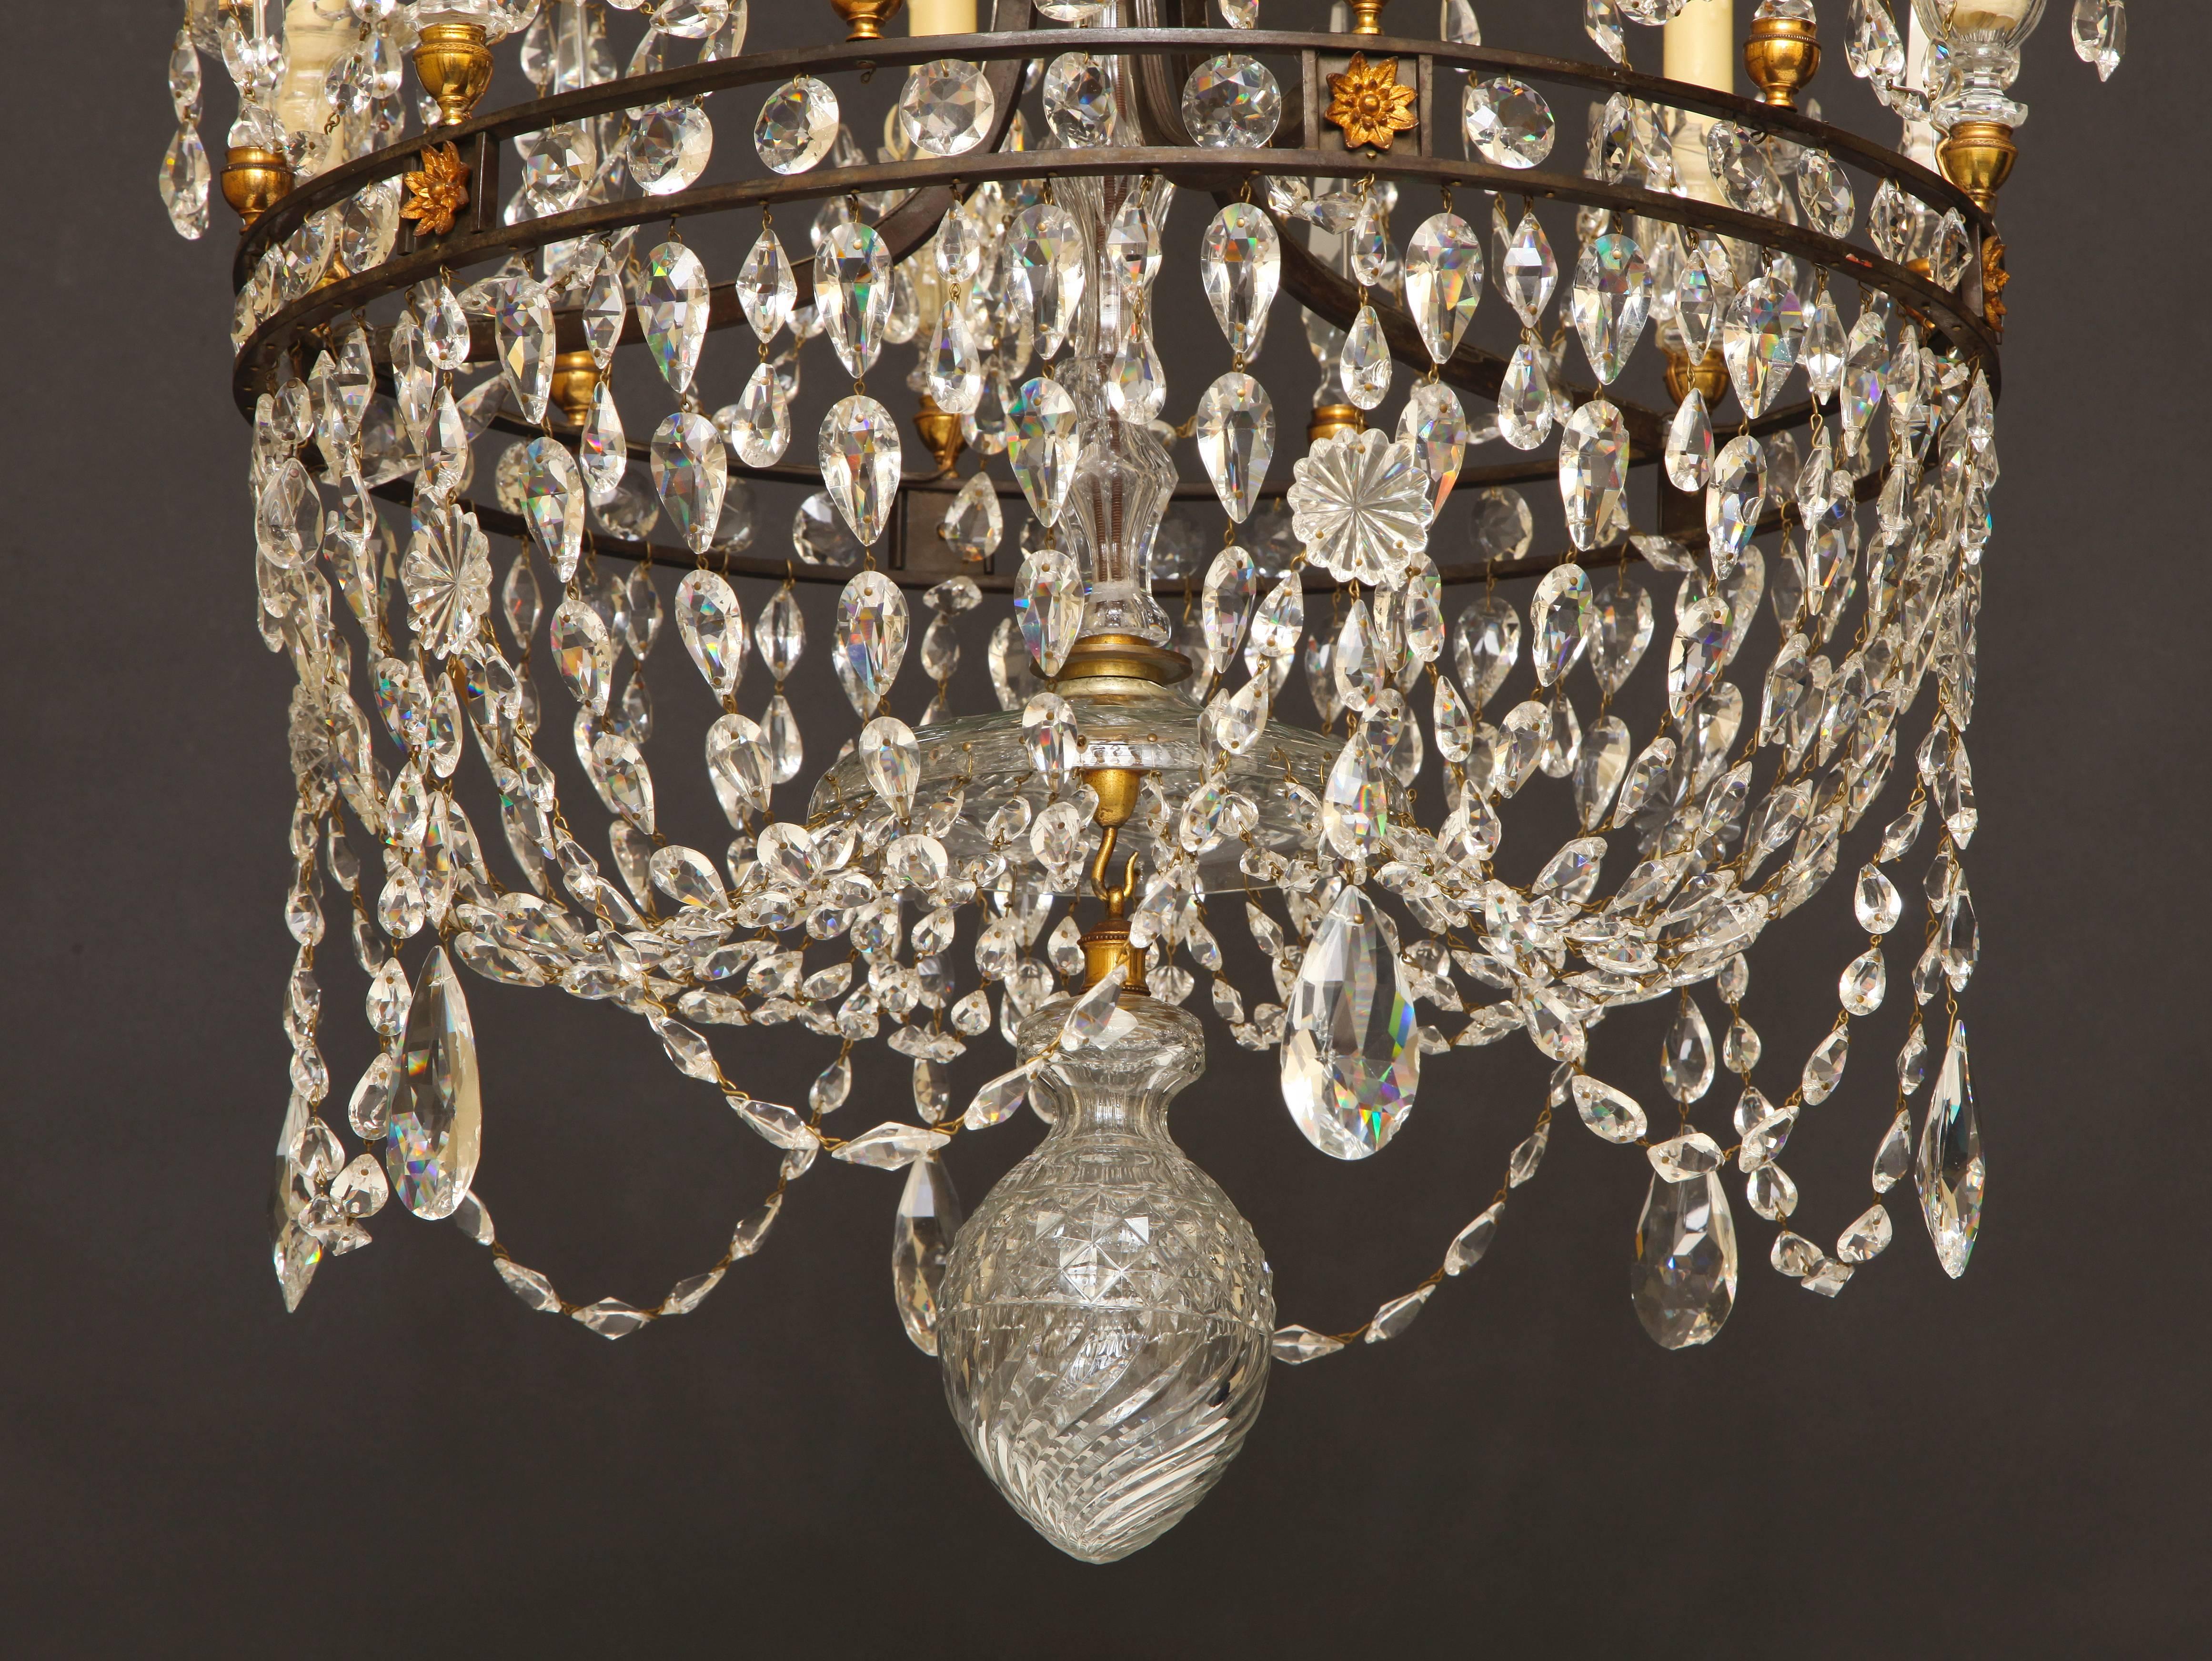 Faceted Crystal and Dark Bronze Six Light Waterford Chandelier With An Empire Basket Bottom.  The Crystal Candle Cups Are Made In The Van Dyke Style And the Center Shaft Has Swirl Cutting To Match The Exquisite Crystal Ball At The Bottom.  The